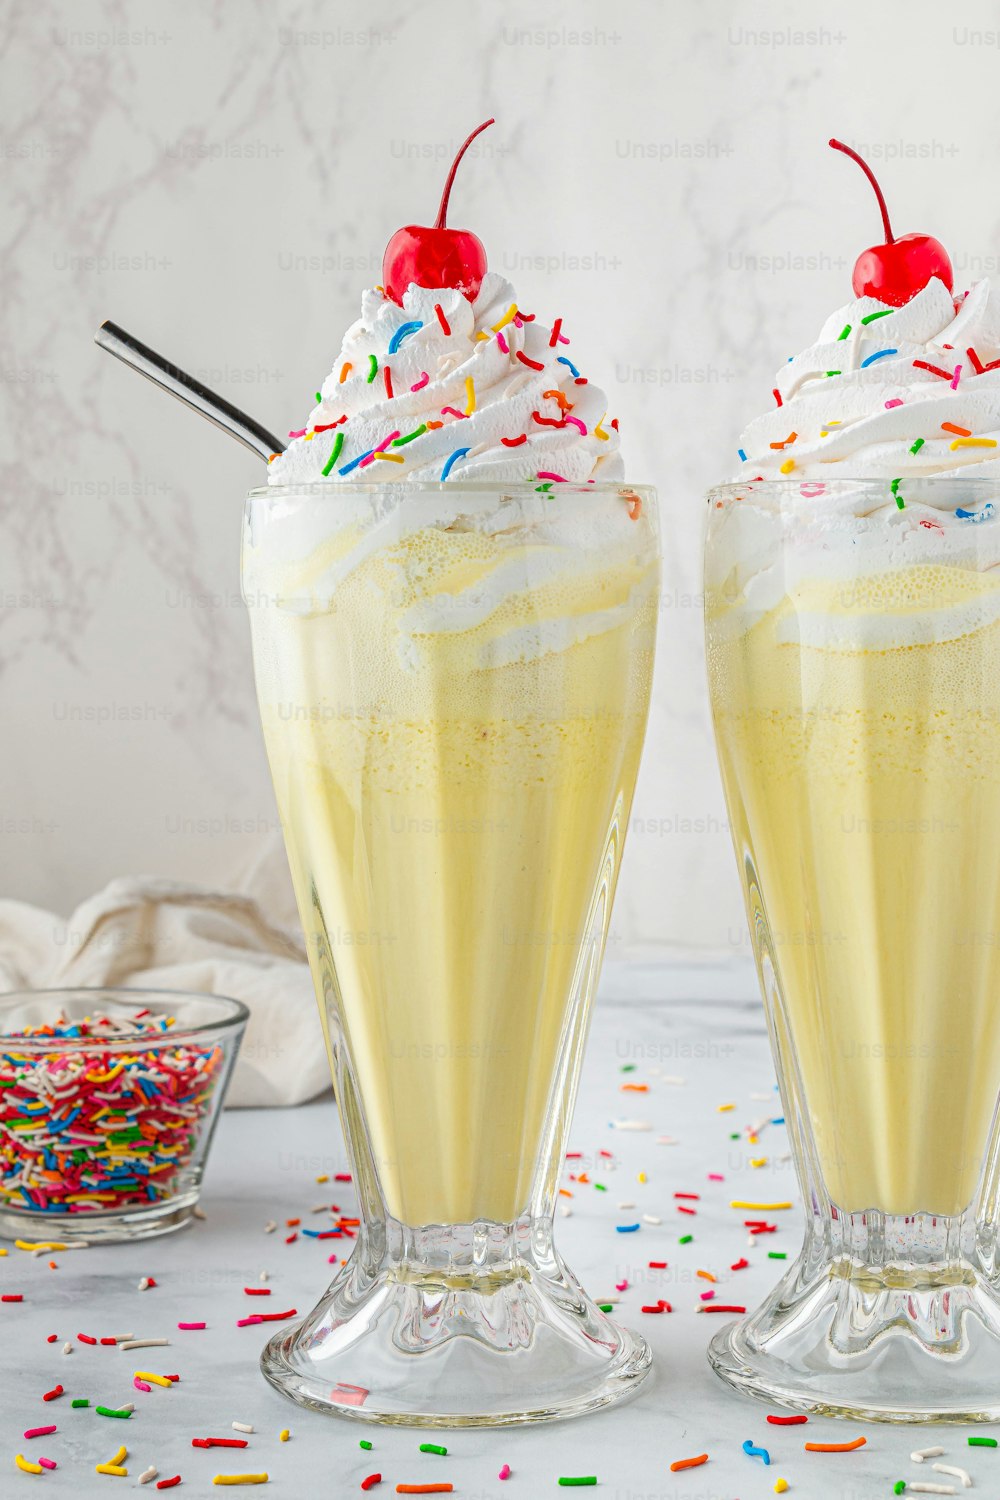 two glasses filled with yellow liquid and topped with sprinkles